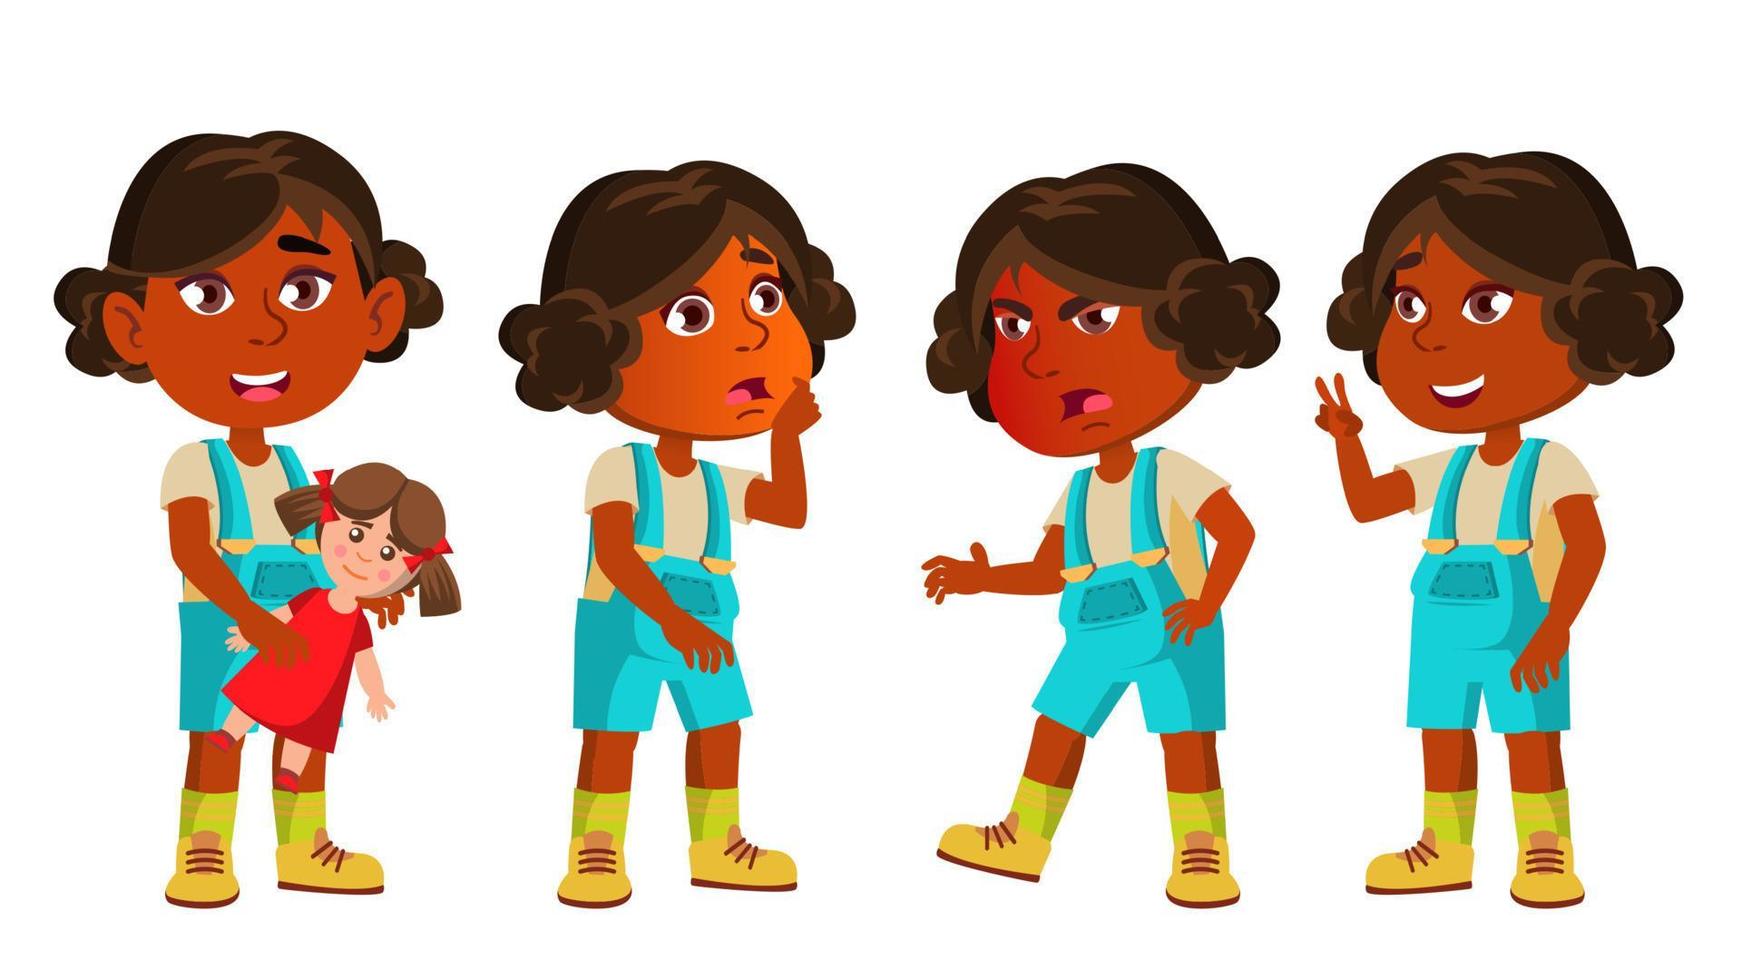 Indian Girl Kindergarten Kid Poses Set Vector. Hindu. Asian. Happy Beautiful Children Character. Playing With Doll. For Advertising, Booklet, Placard Design. Isolated Cartoon Illustration vector